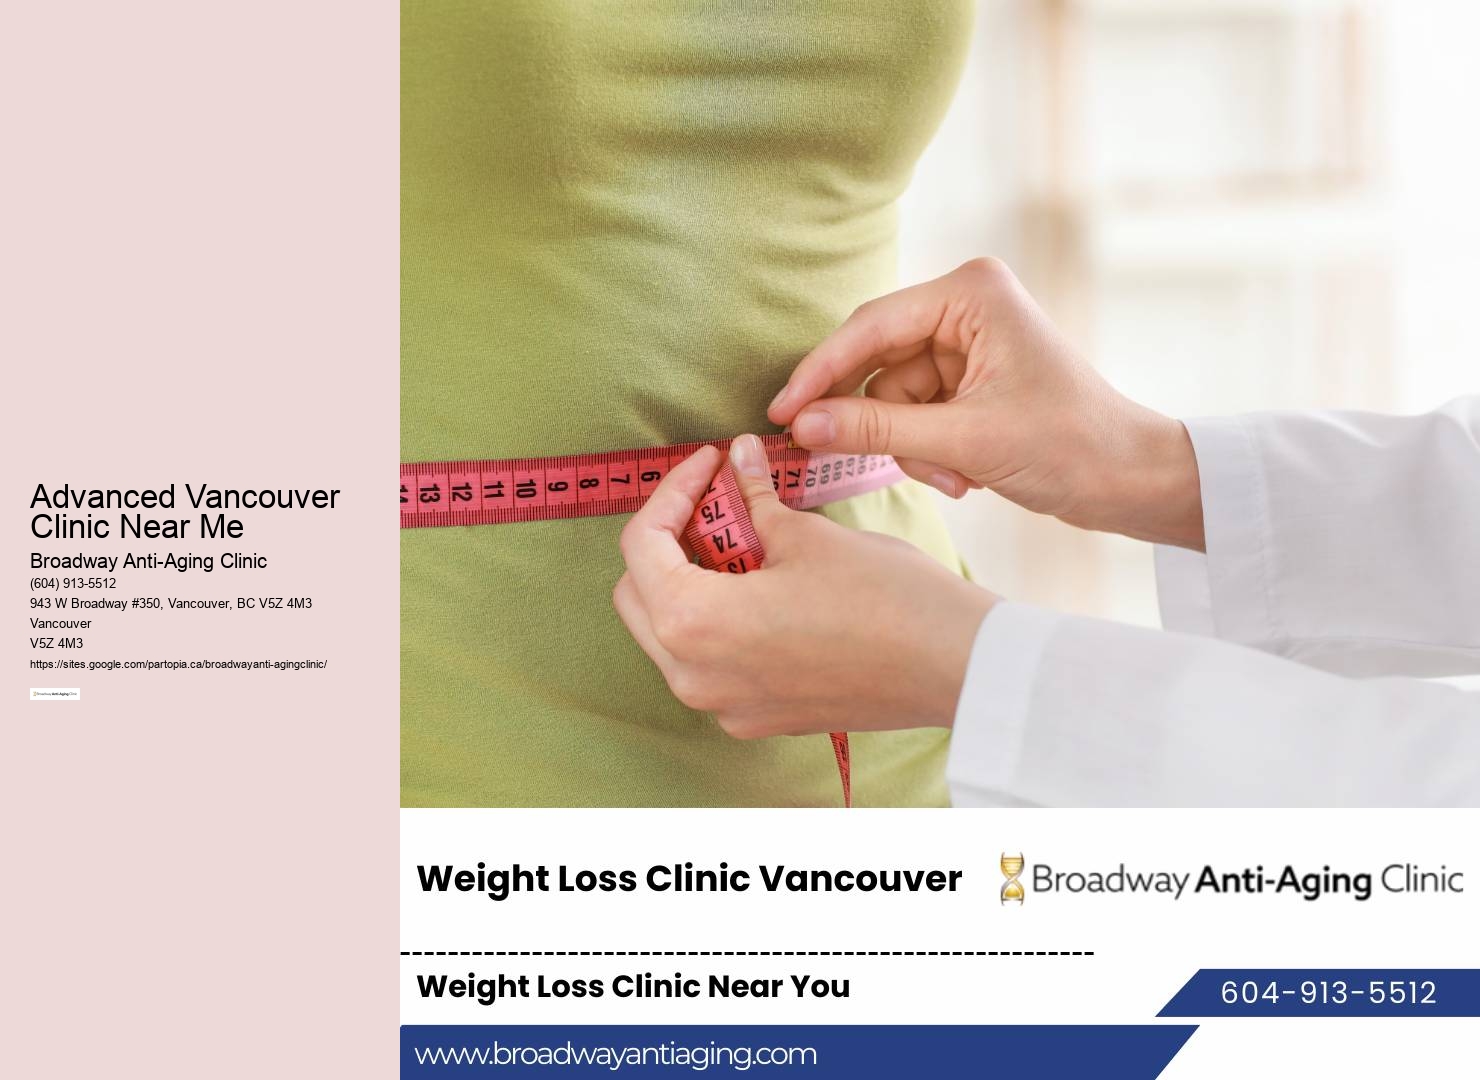 Revolution medical clinic Vancouver weight loss